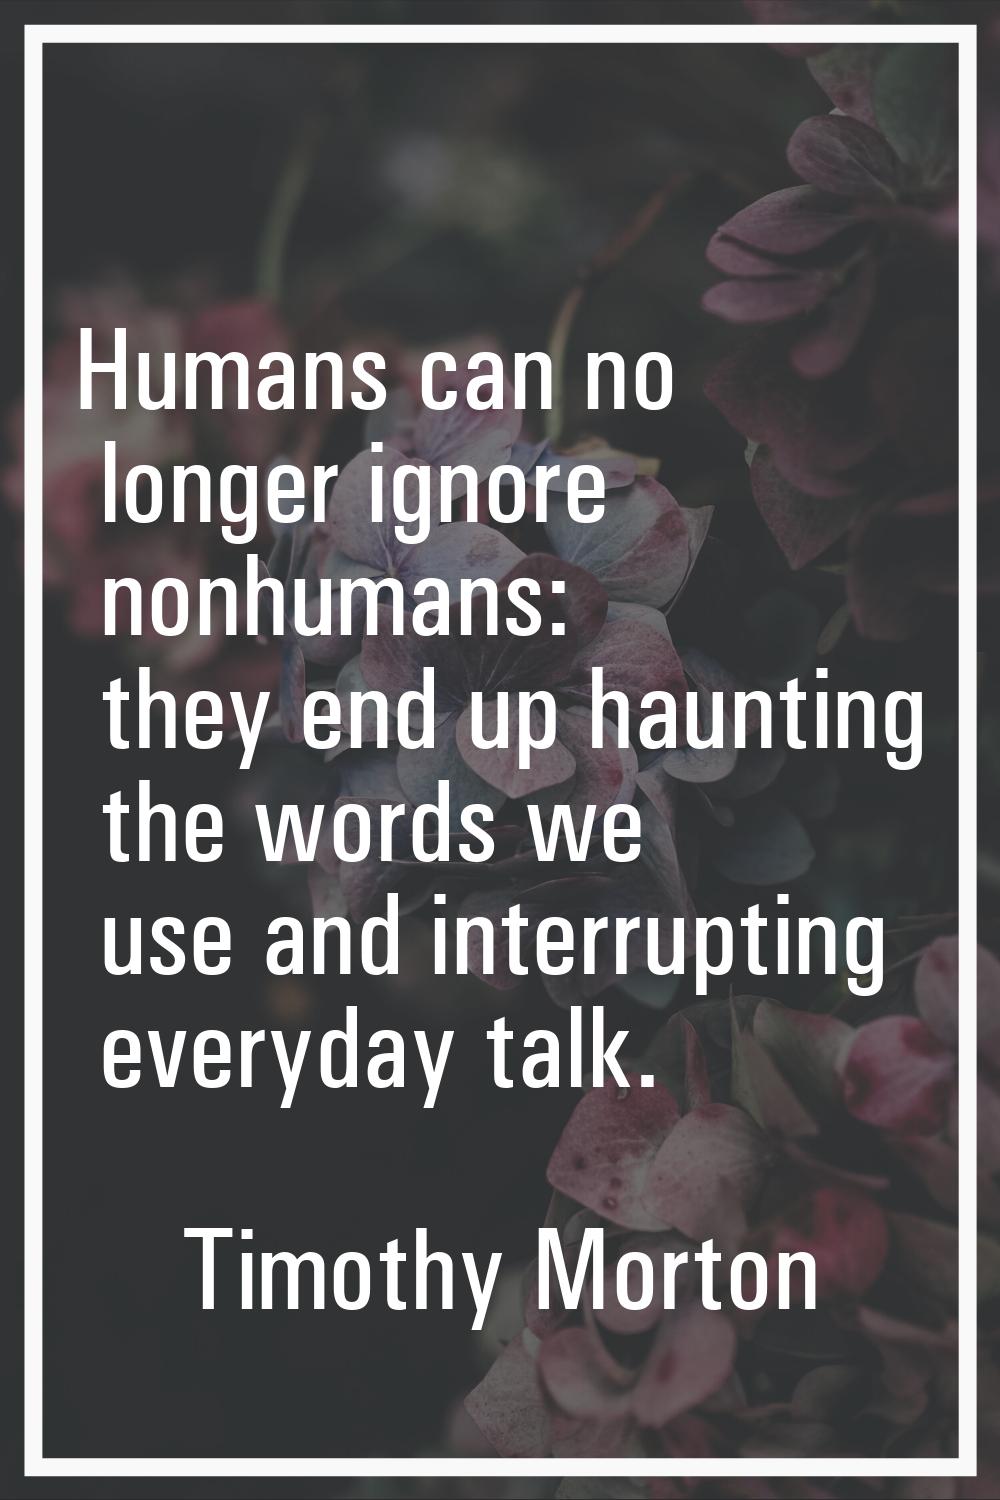 Humans can no longer ignore nonhumans: they end up haunting the words we use and interrupting every